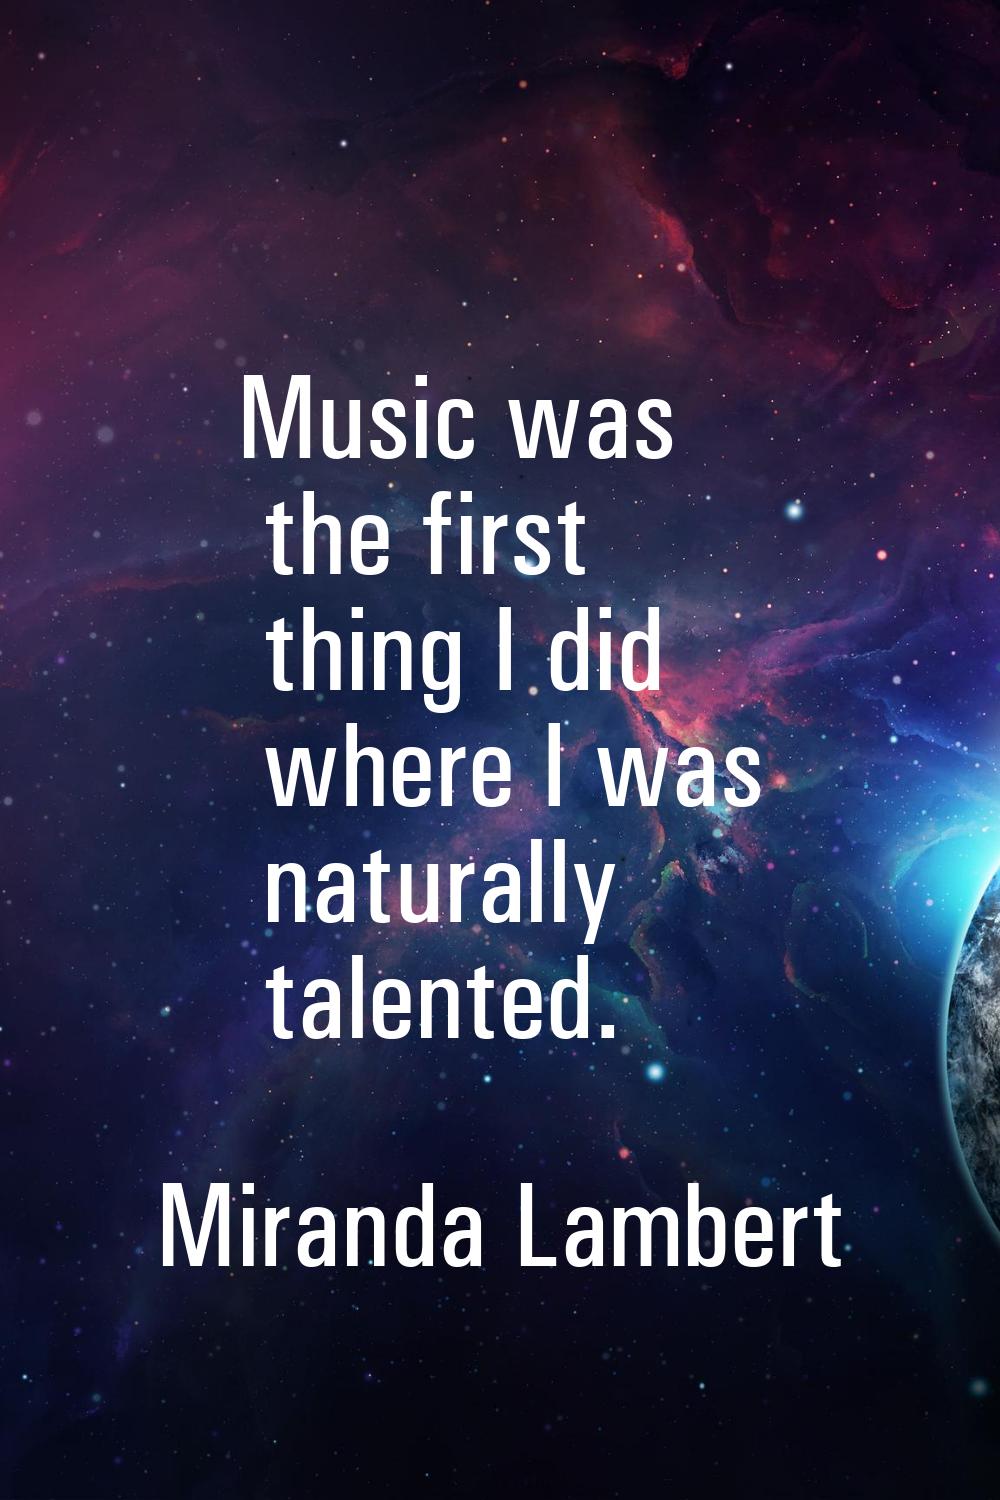 Music was the first thing I did where I was naturally talented.